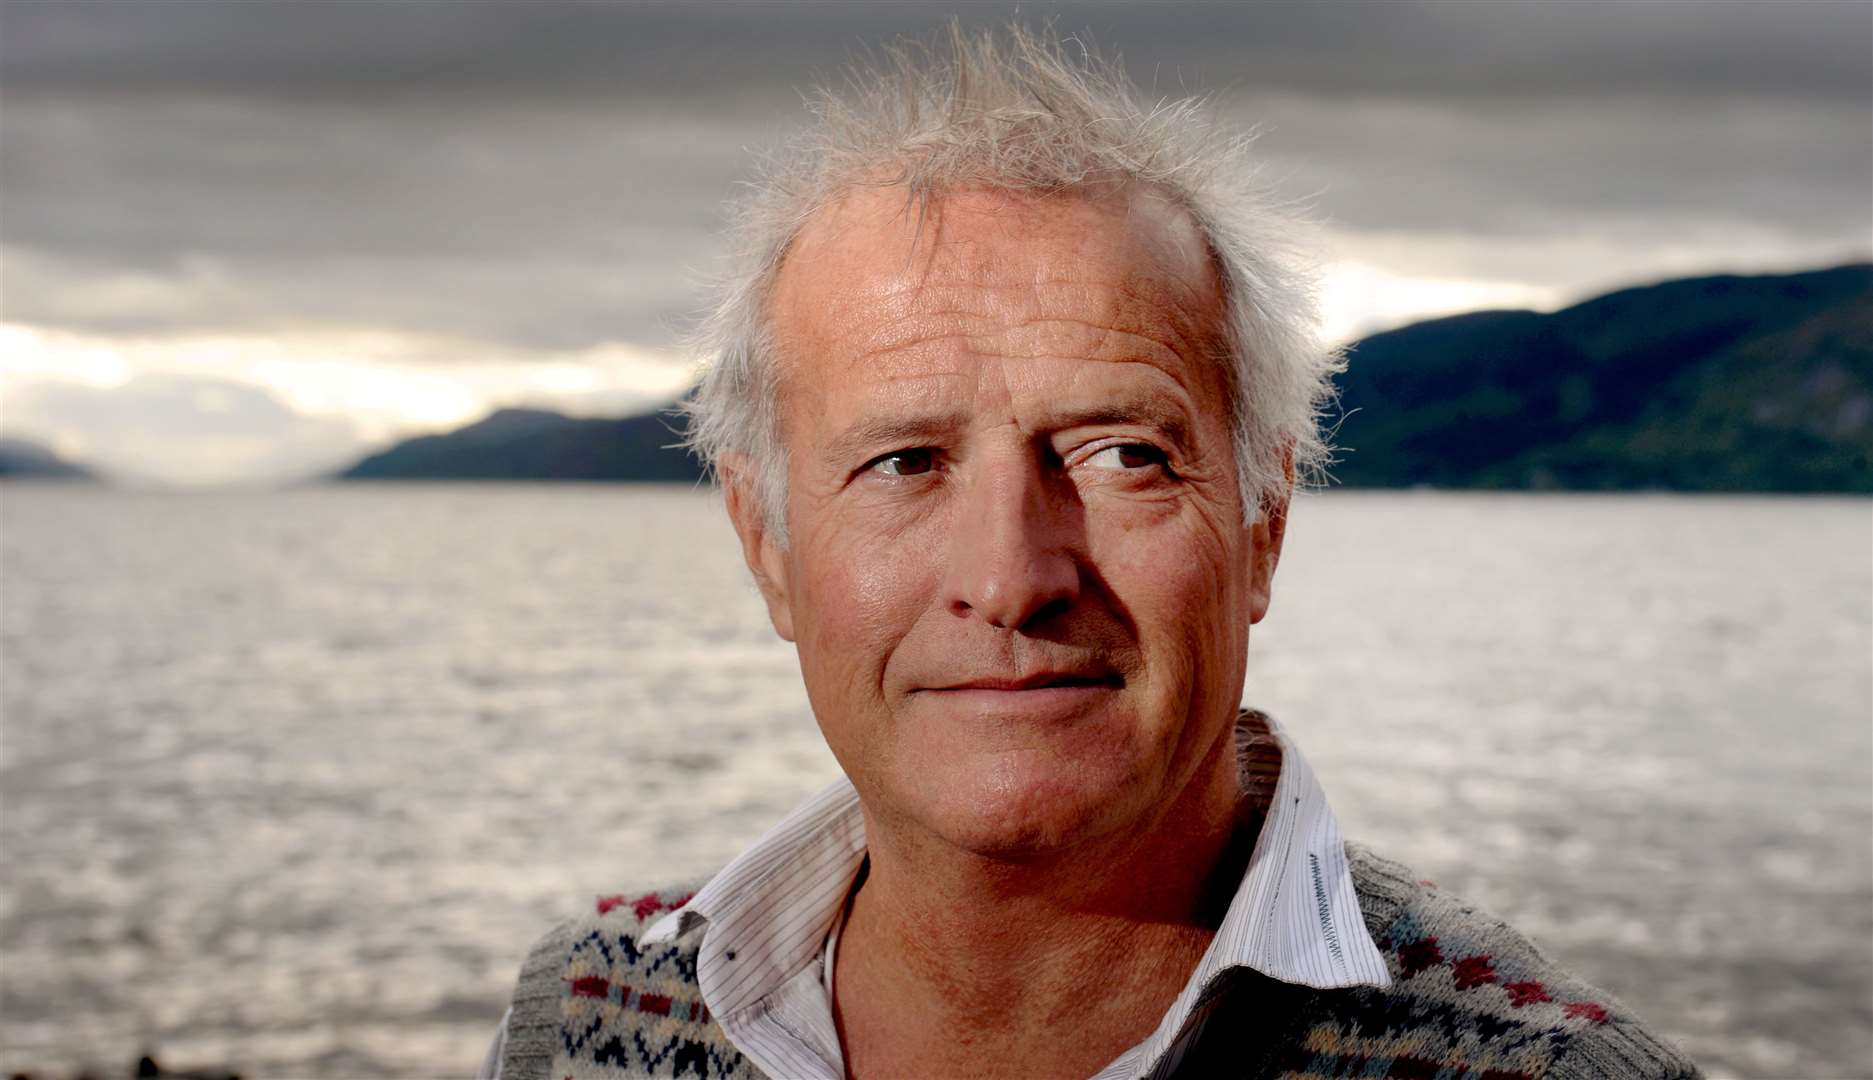 Steve Feltham has set a world record for the longest continuous vigil of looking for Nessie.